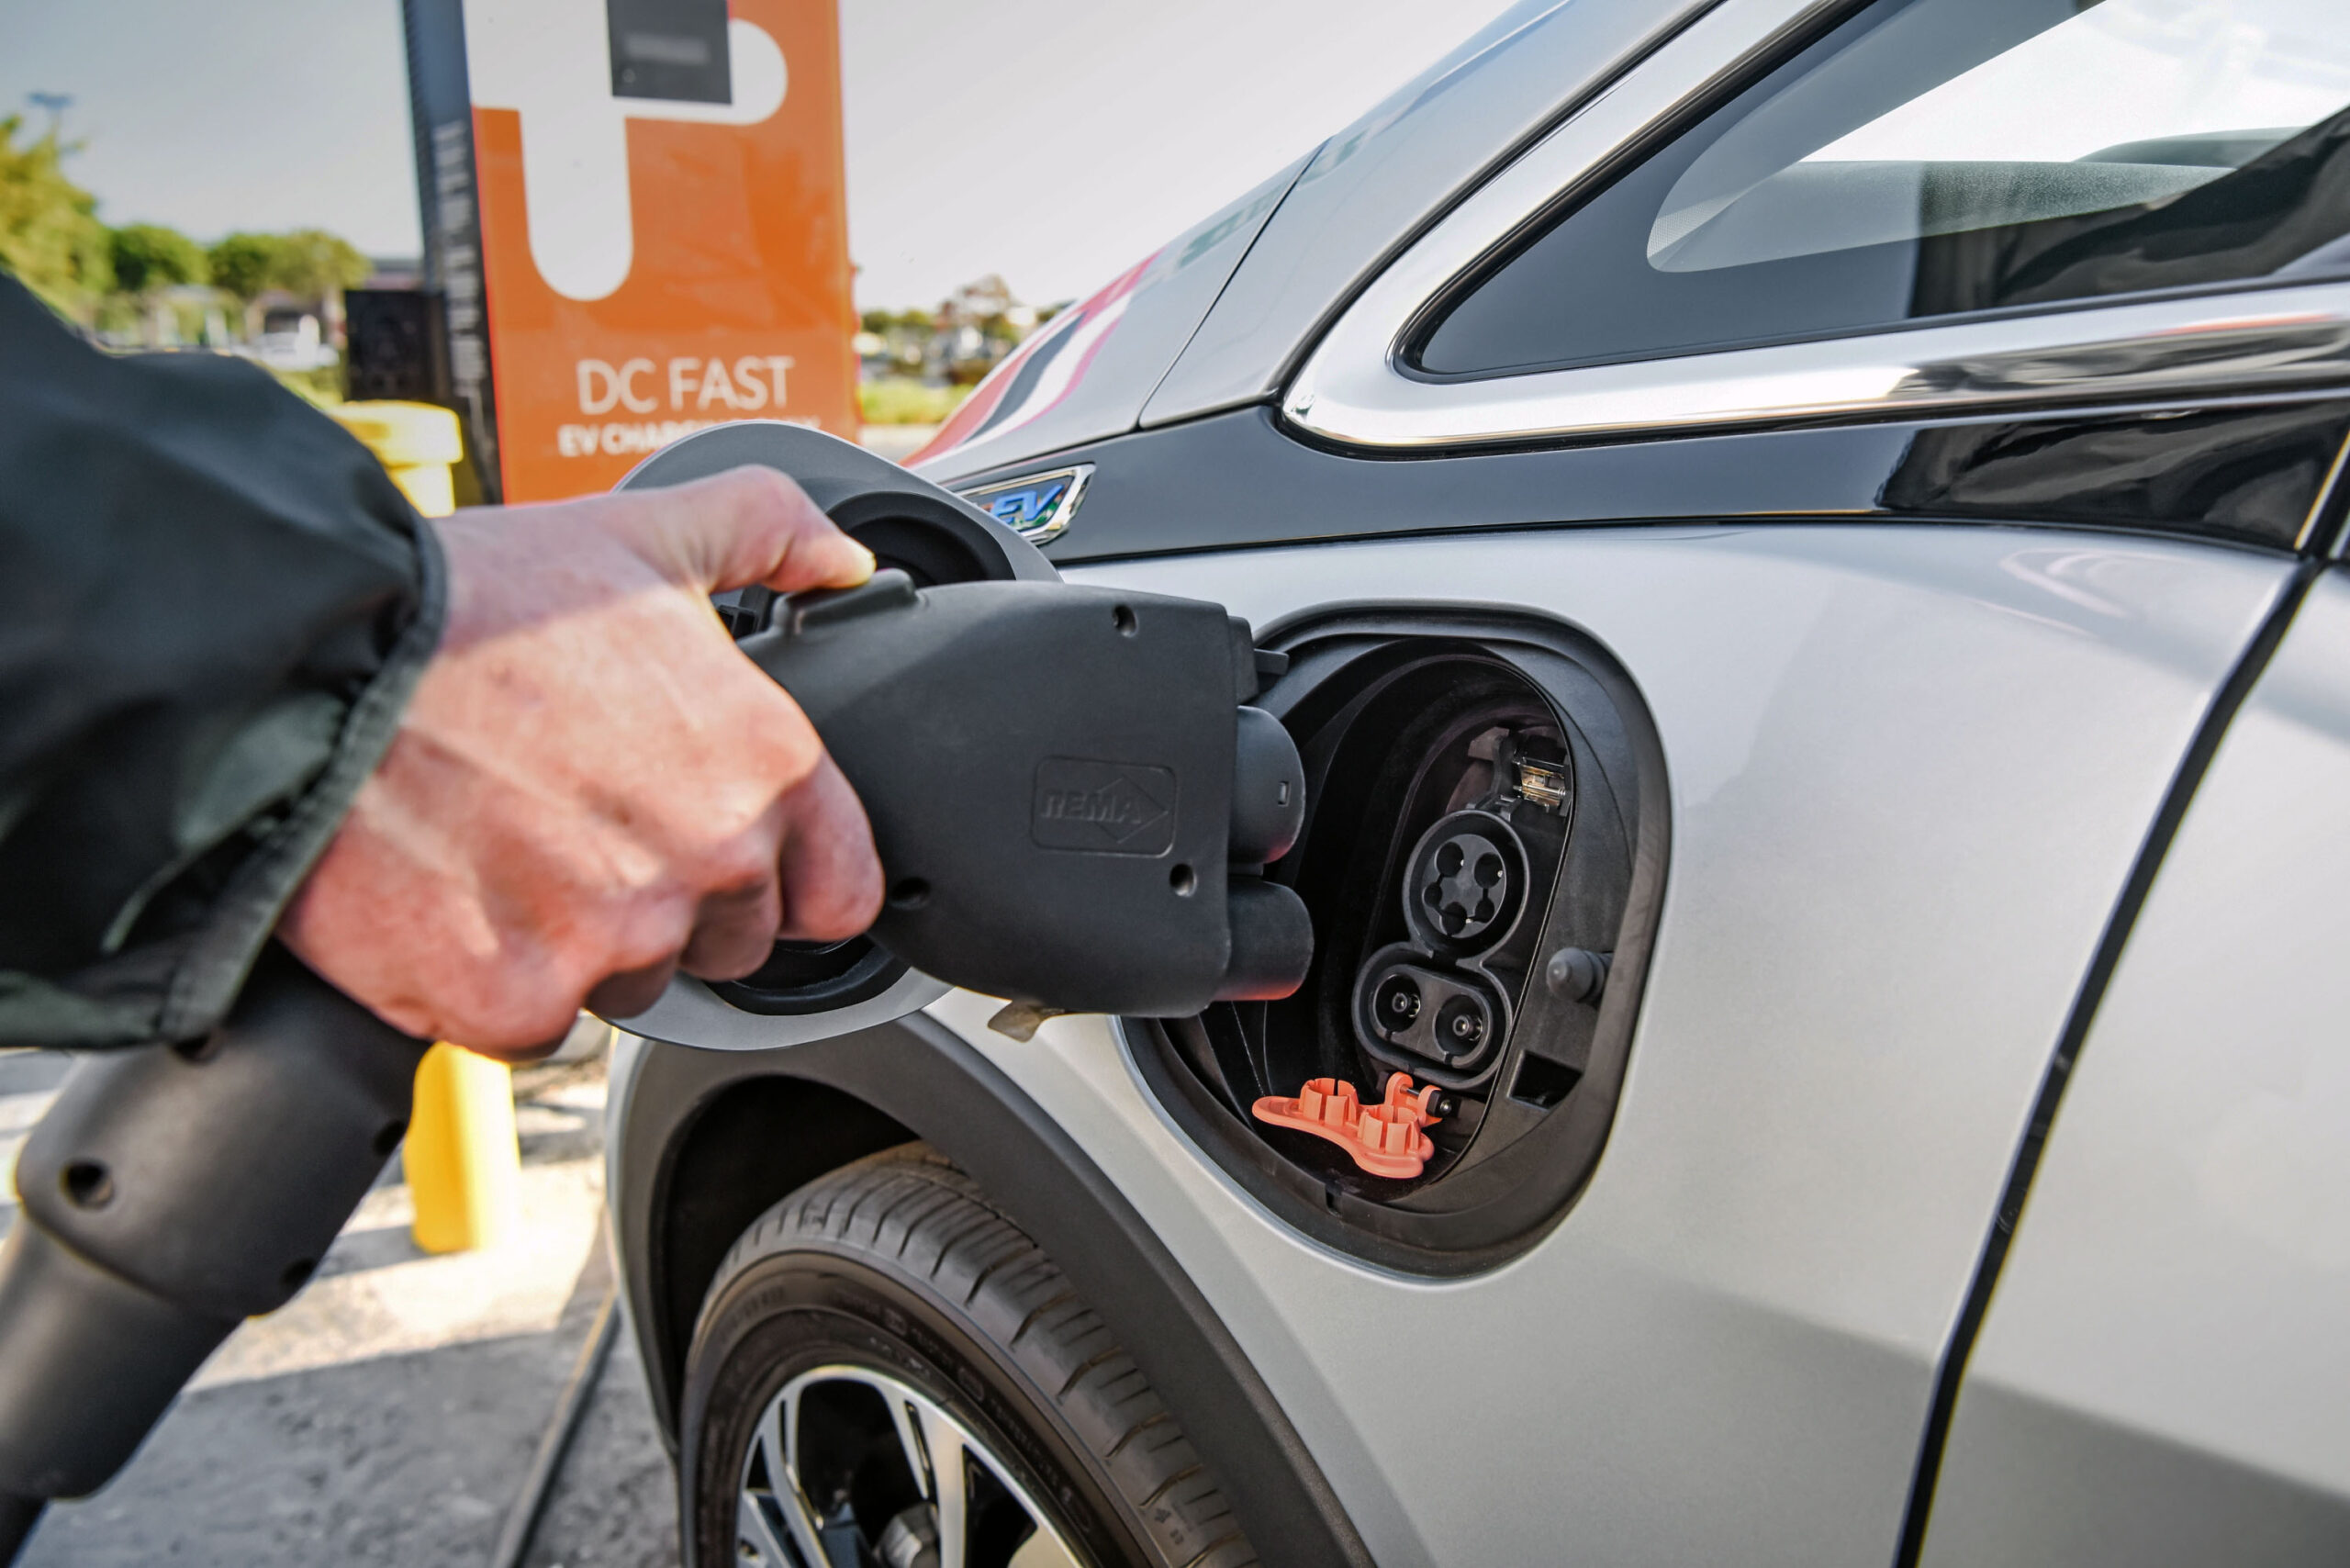 NIADA submits comments to FHWA regarding the National EV Charging Program